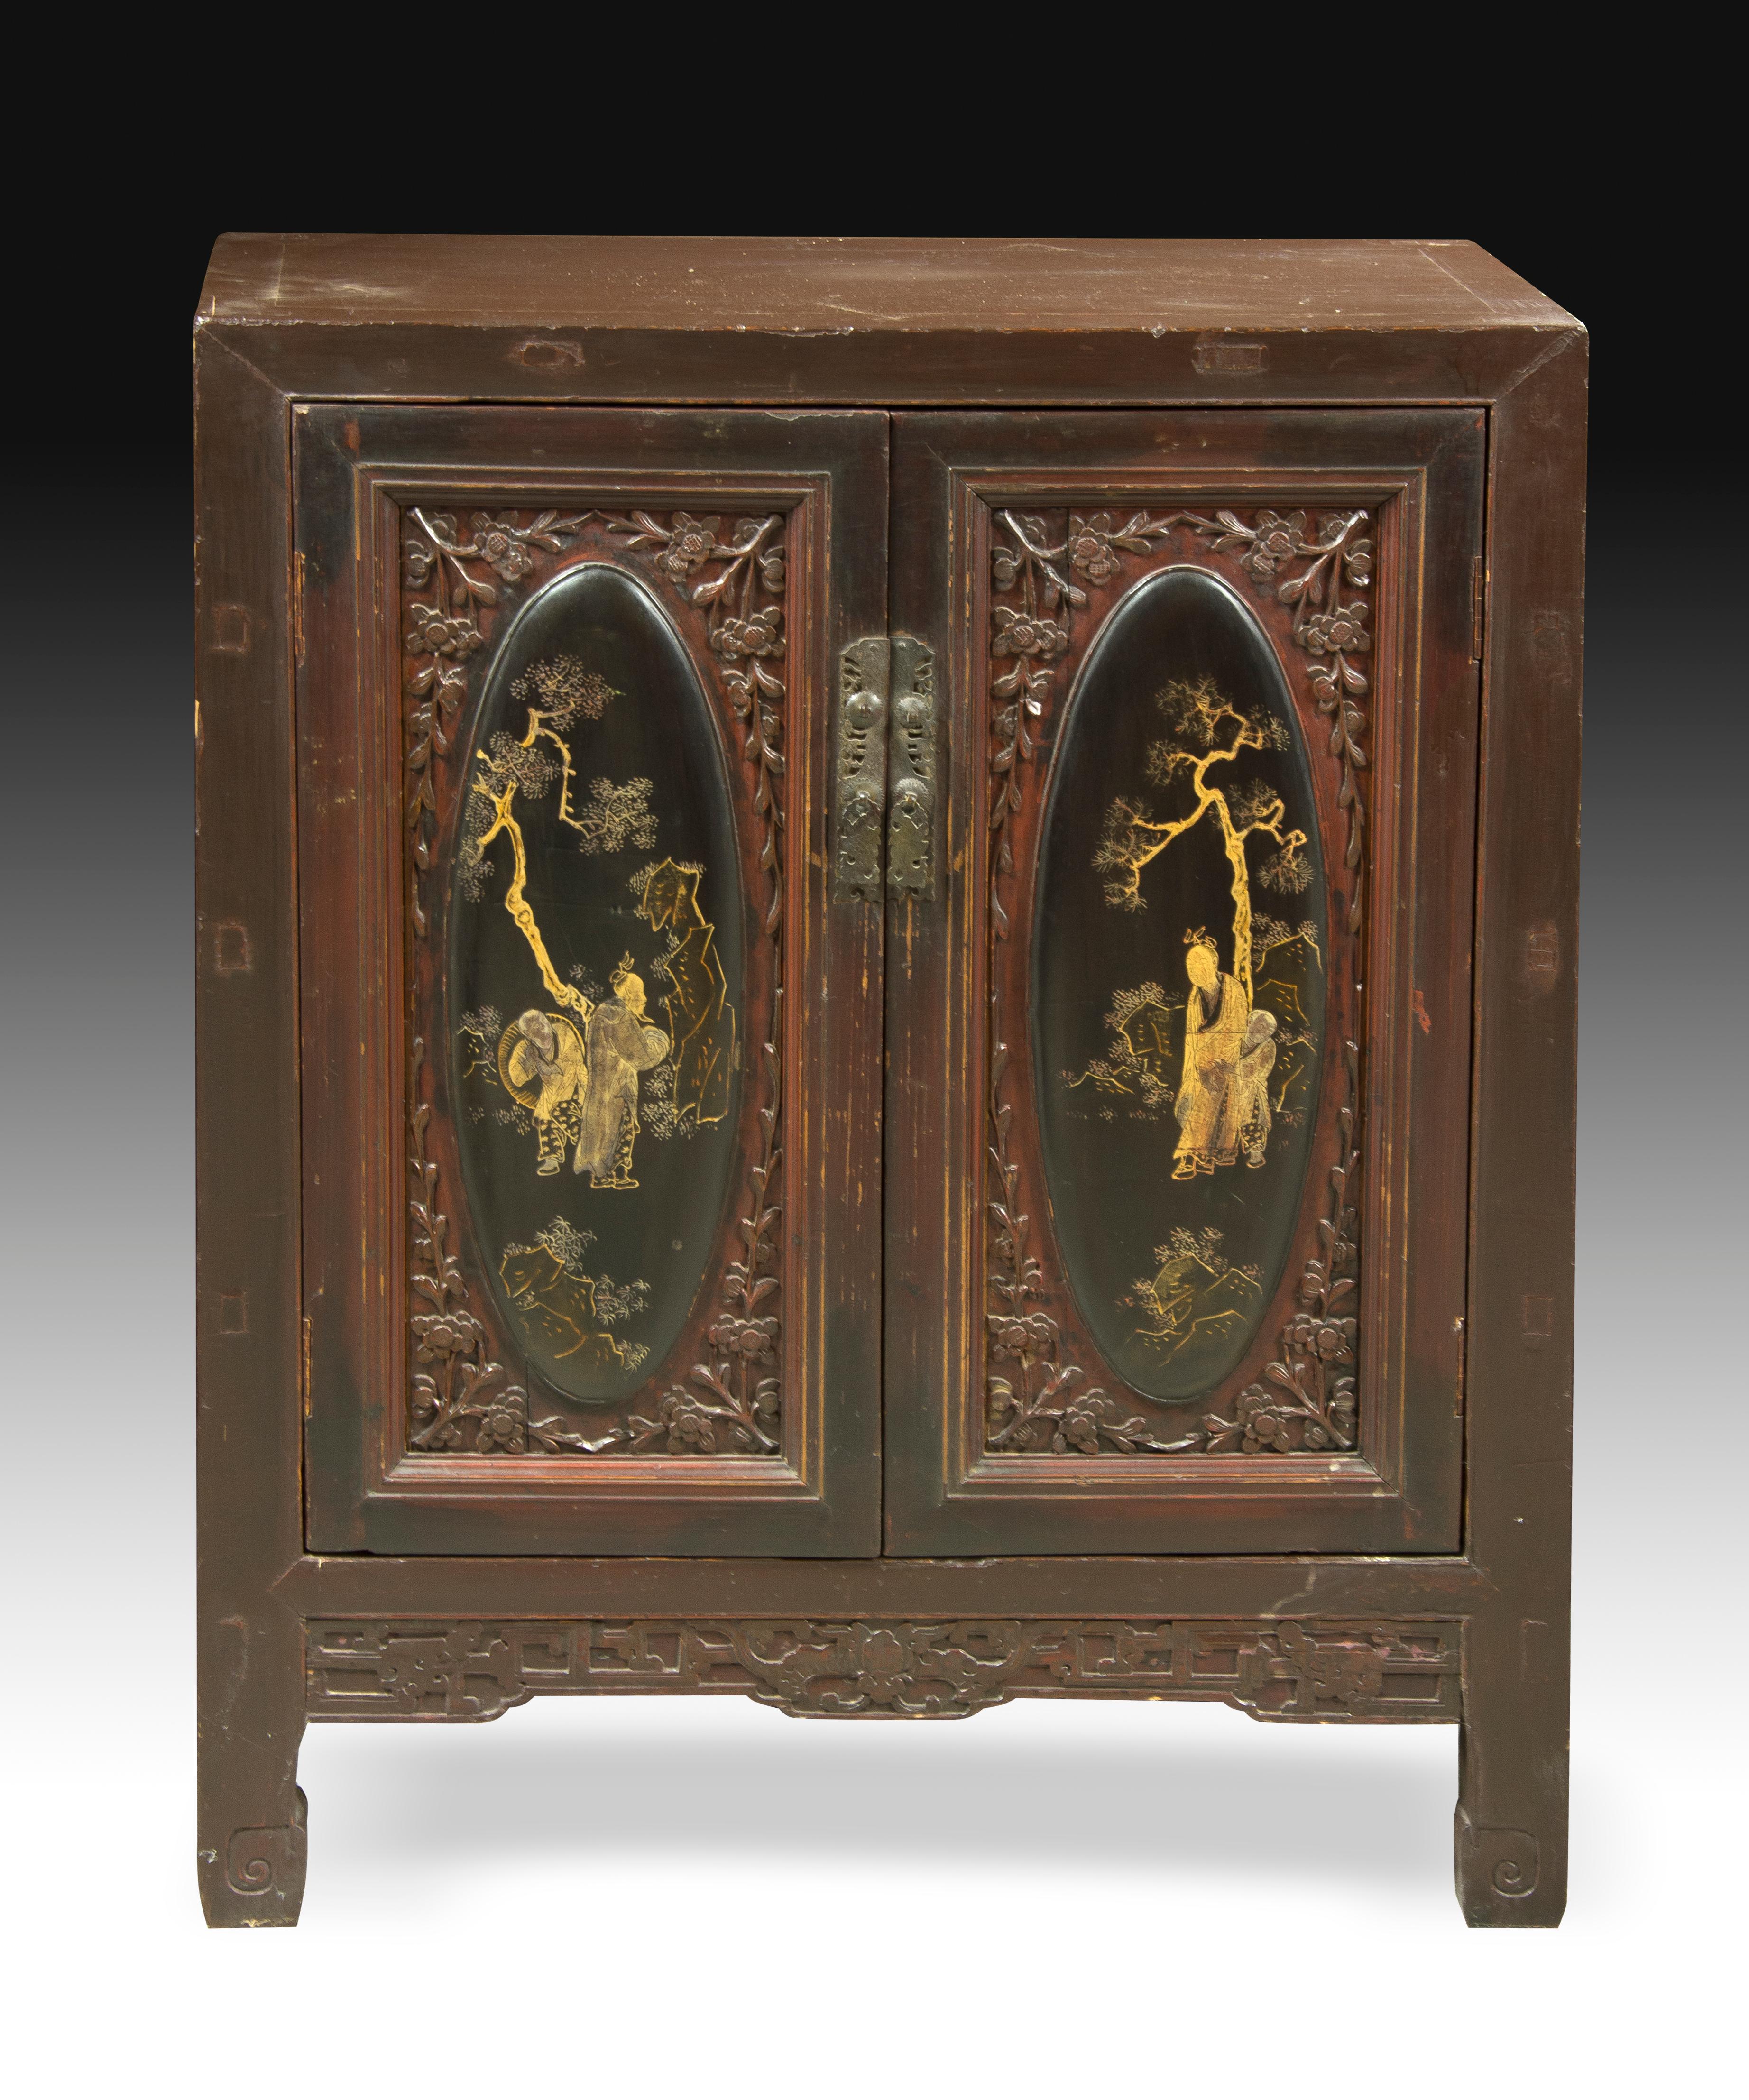 Wooden furniture decorated in its two front doors with oval figurative scenes (idealized landscapes and characters in gold on a black background) enhanced by frames with floral elements in relief, a band of sizes on the bottom and small details on